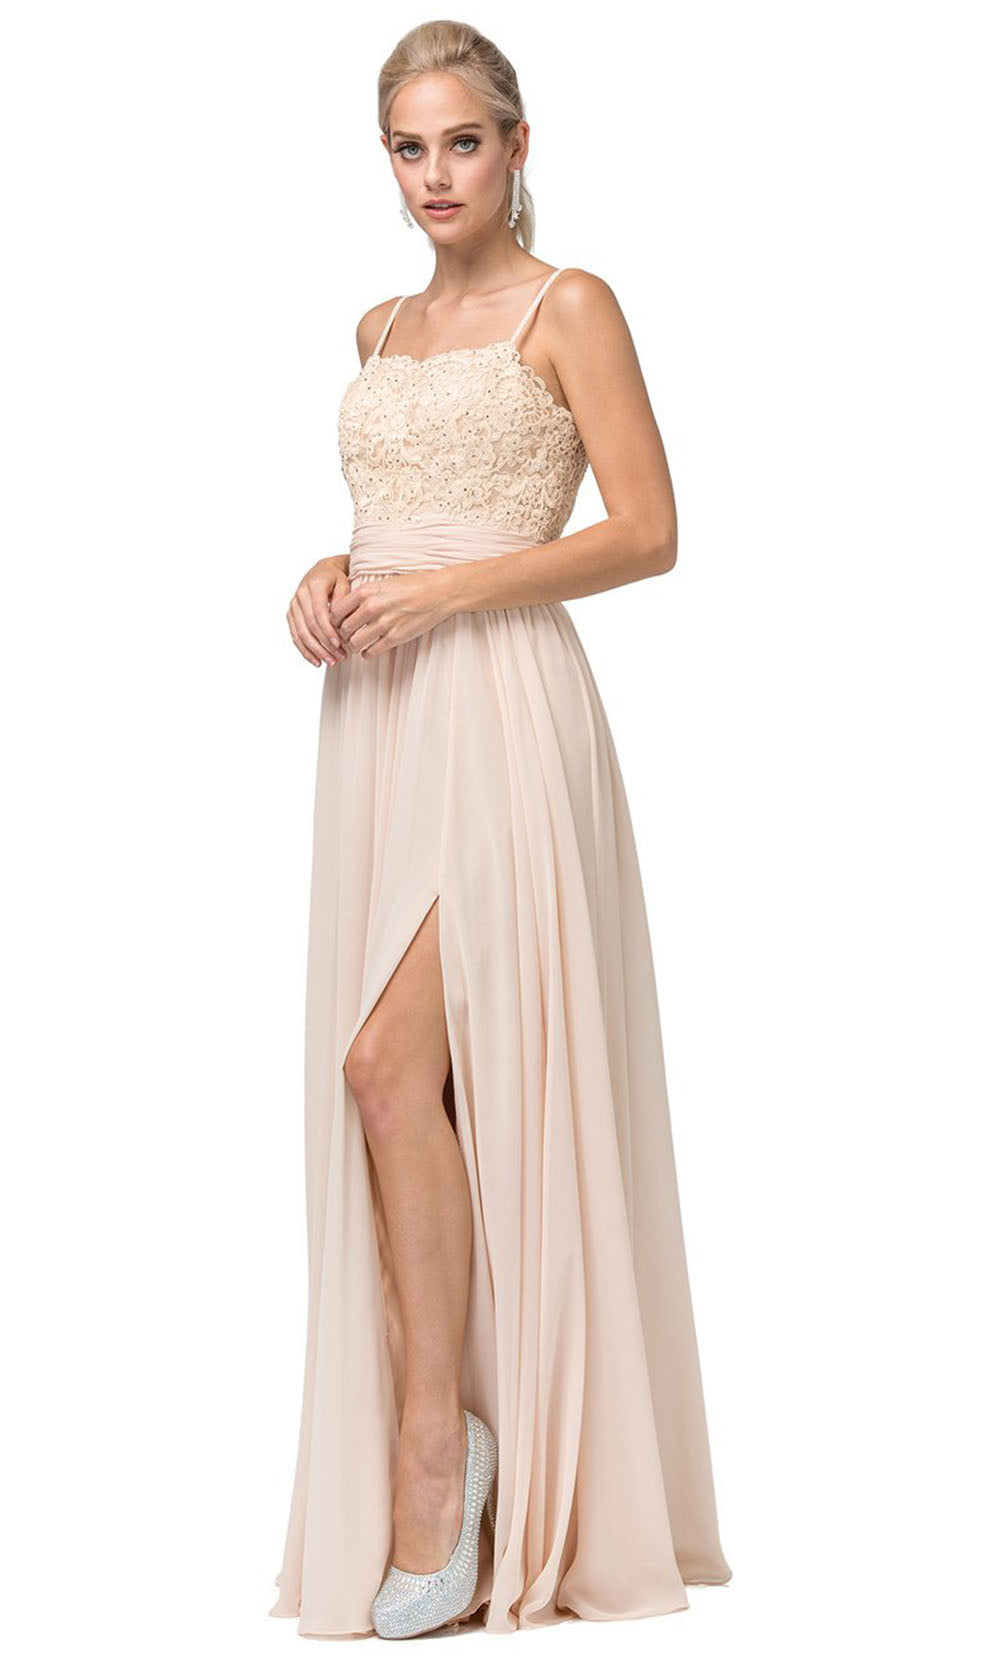 Dancing Queen - 2789 Sleeveless Lace Bodice Slit A-Line Gown In Champagne & Gold